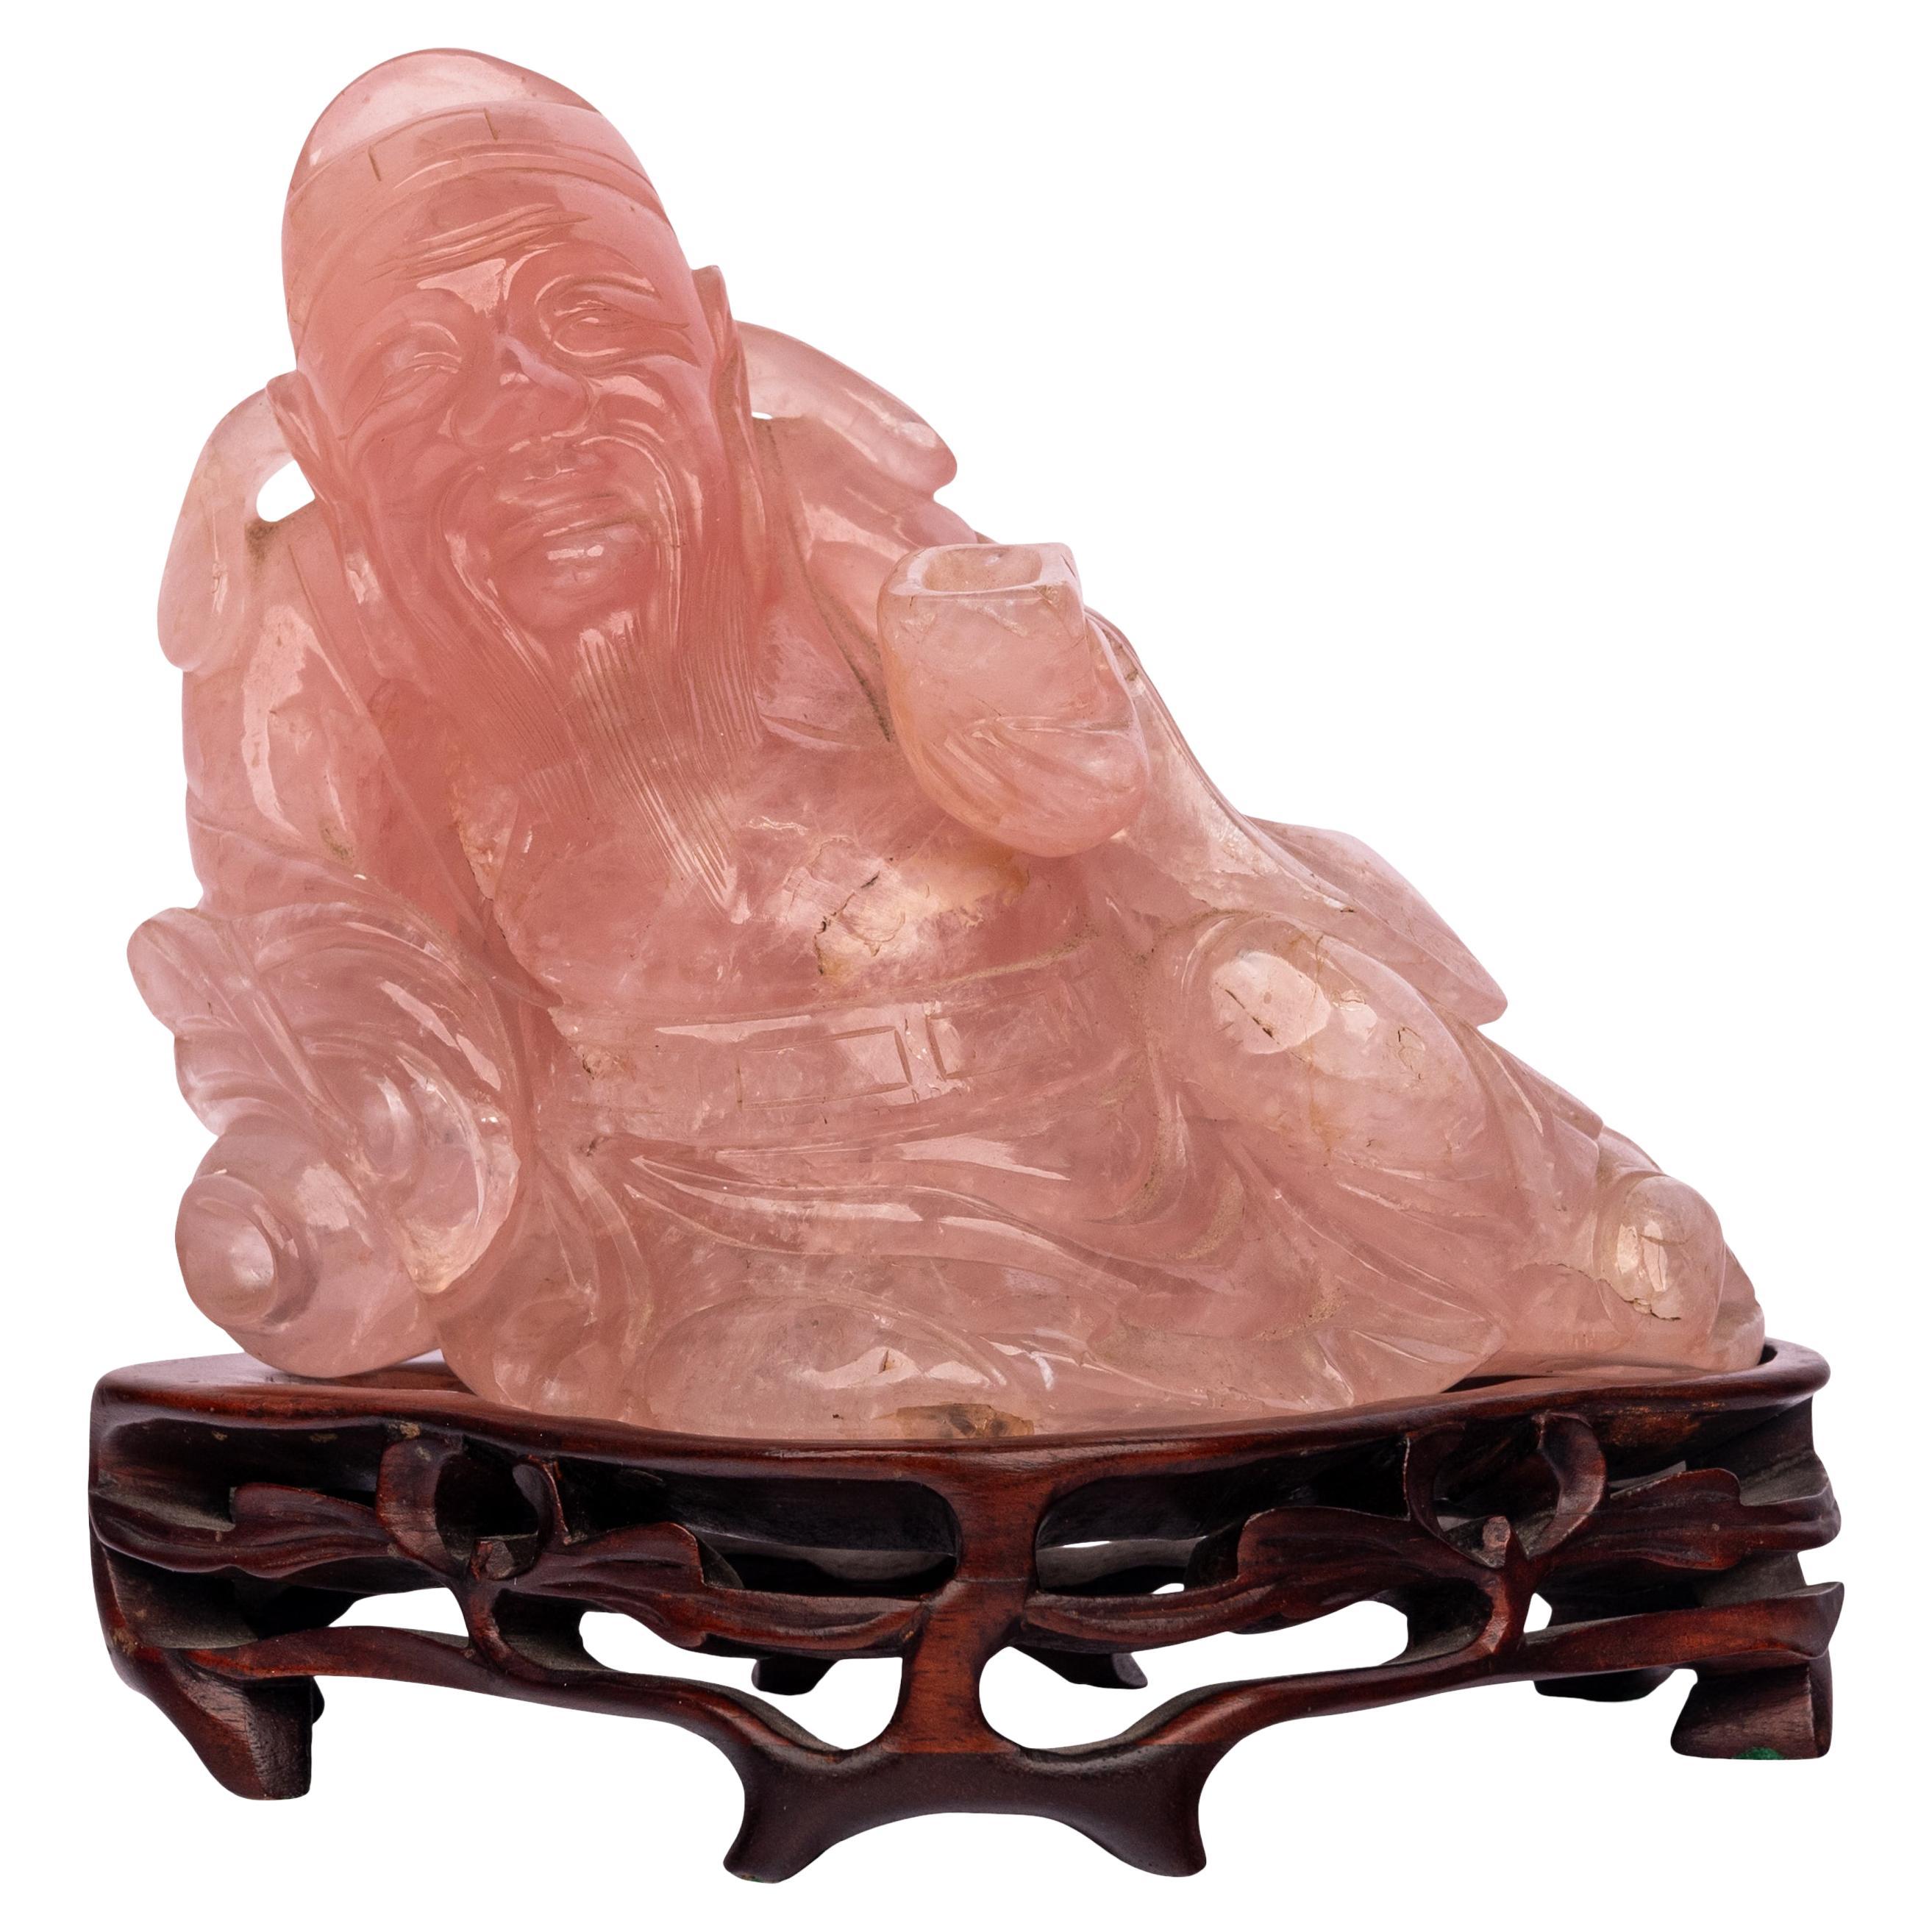 Antique Chinese Qing Dynasty Carved Rose Quartz Hotei Buddha Statue & Stand 1910 For Sale